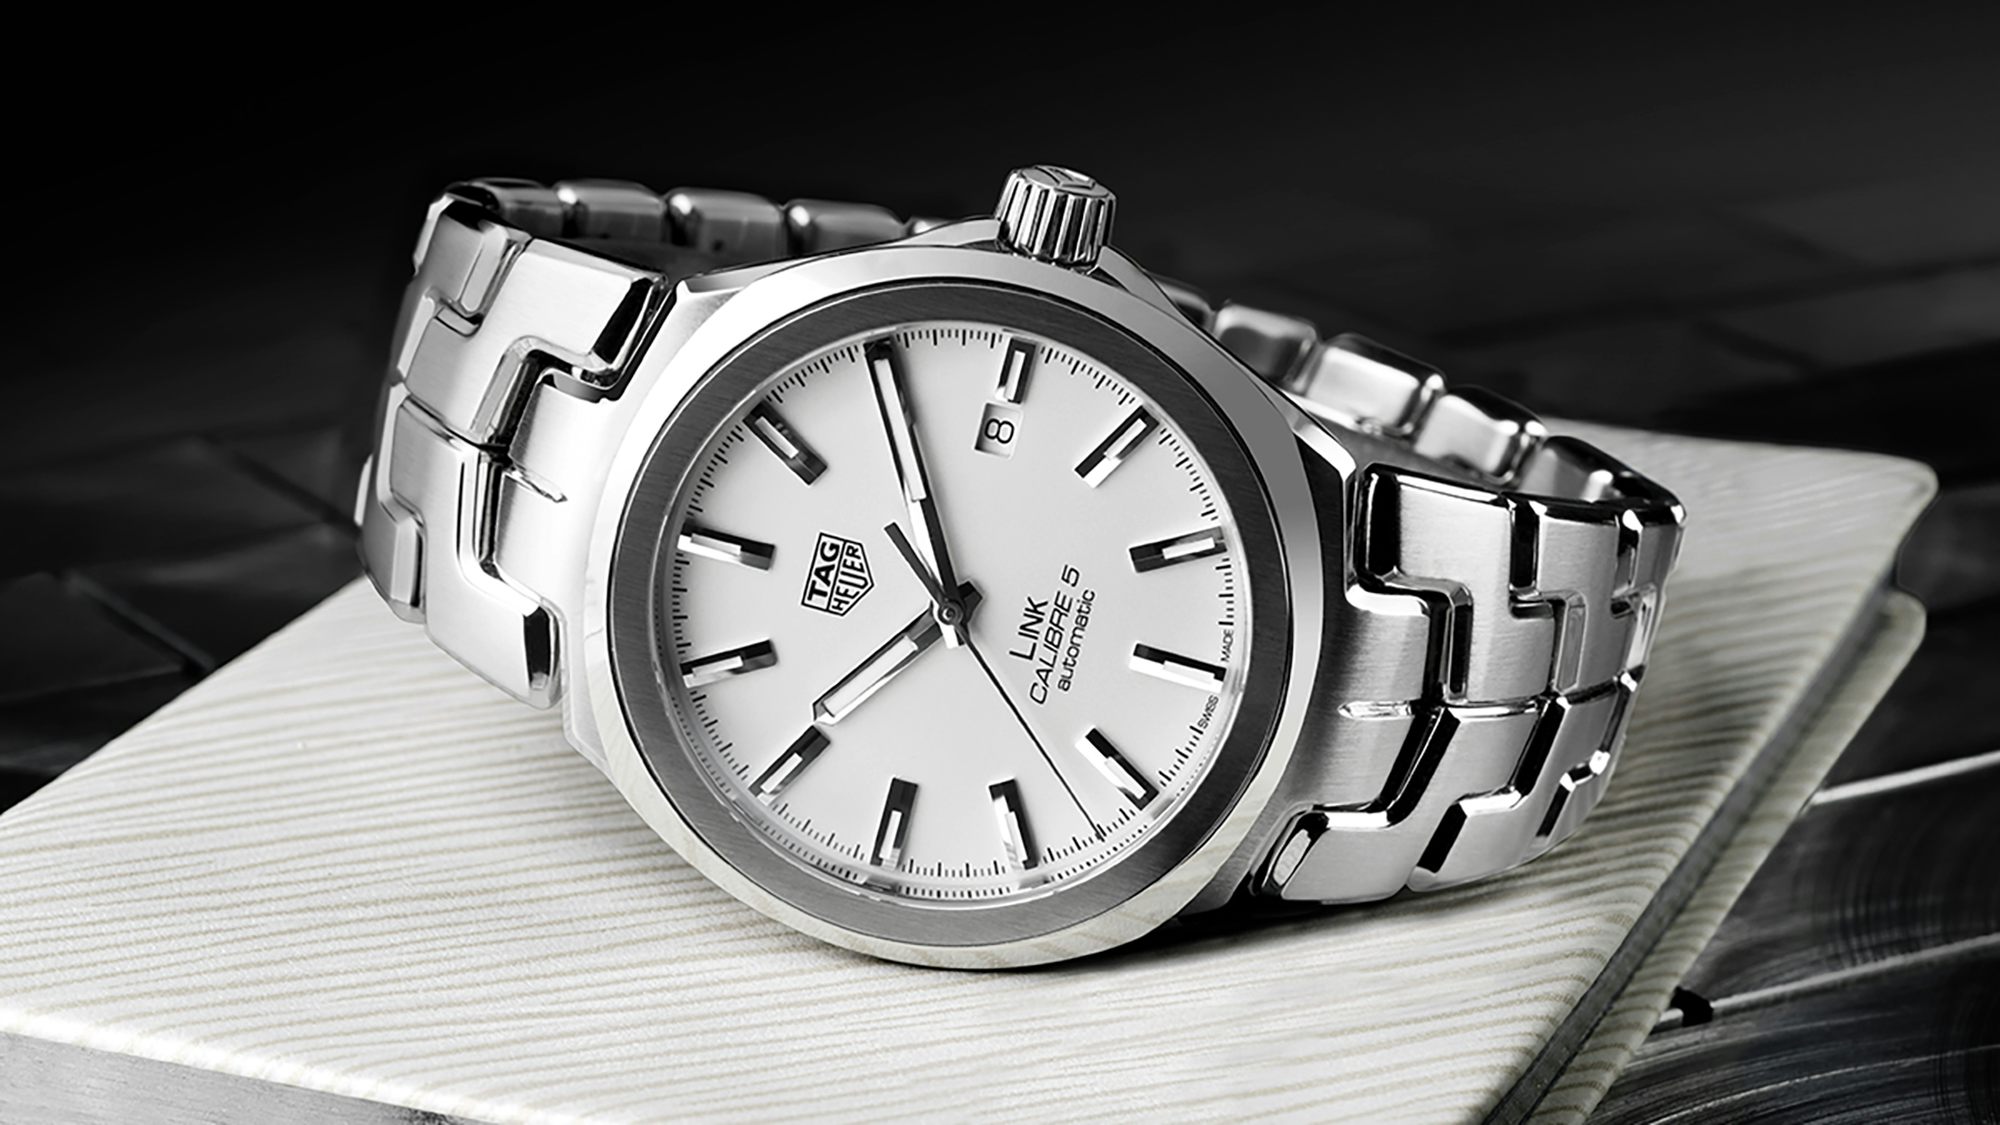 Linking Past to Present: The Evolution of the TAG Heuer Link